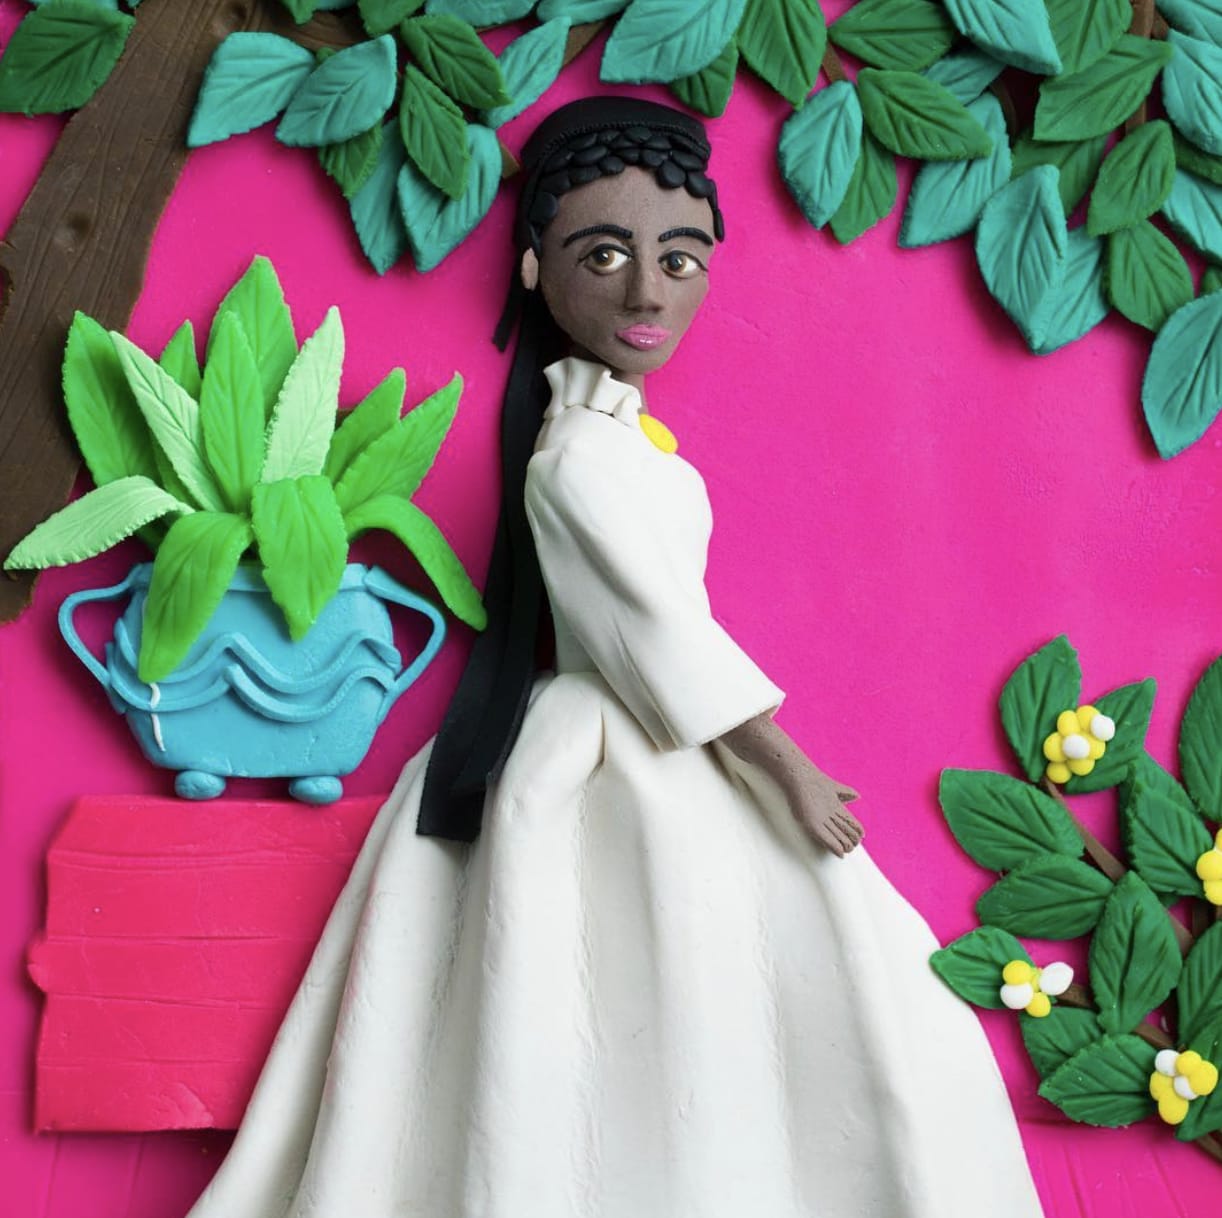 Eleanor McNair, Original photograph: Sarah Forbes Bonetta, 1862 by Camille Silvy rendered in Play-Doh, 2017